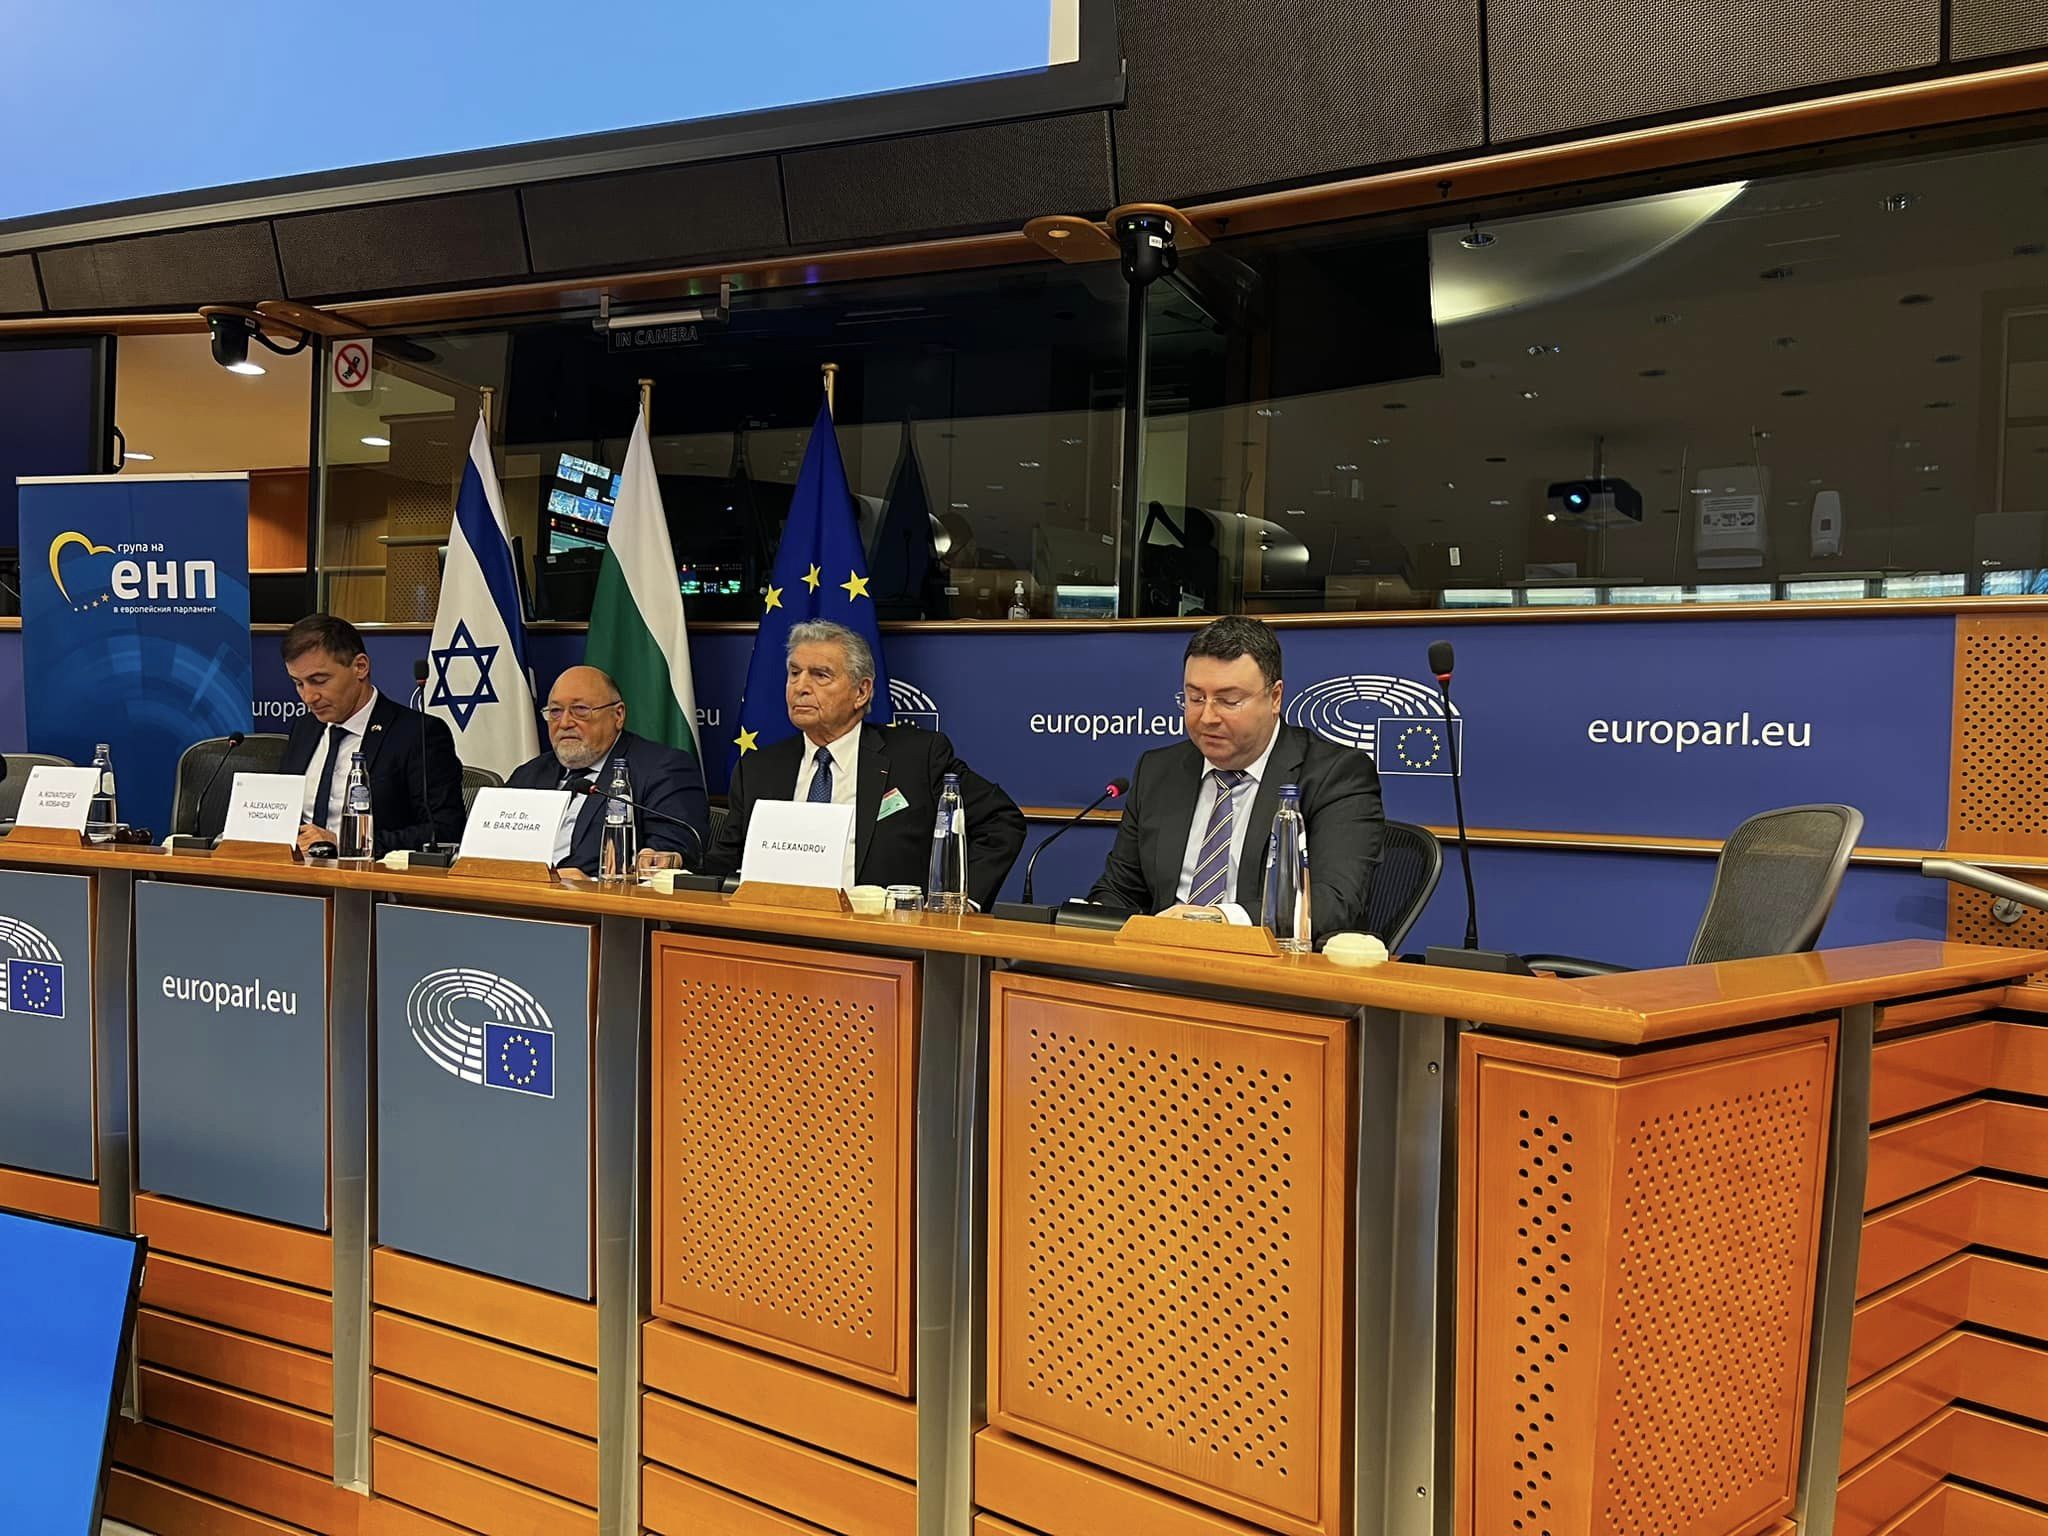 The 80th anniversary of the rescue of Bulgarian Jews during the Second World War was celebrated in the European Parliament